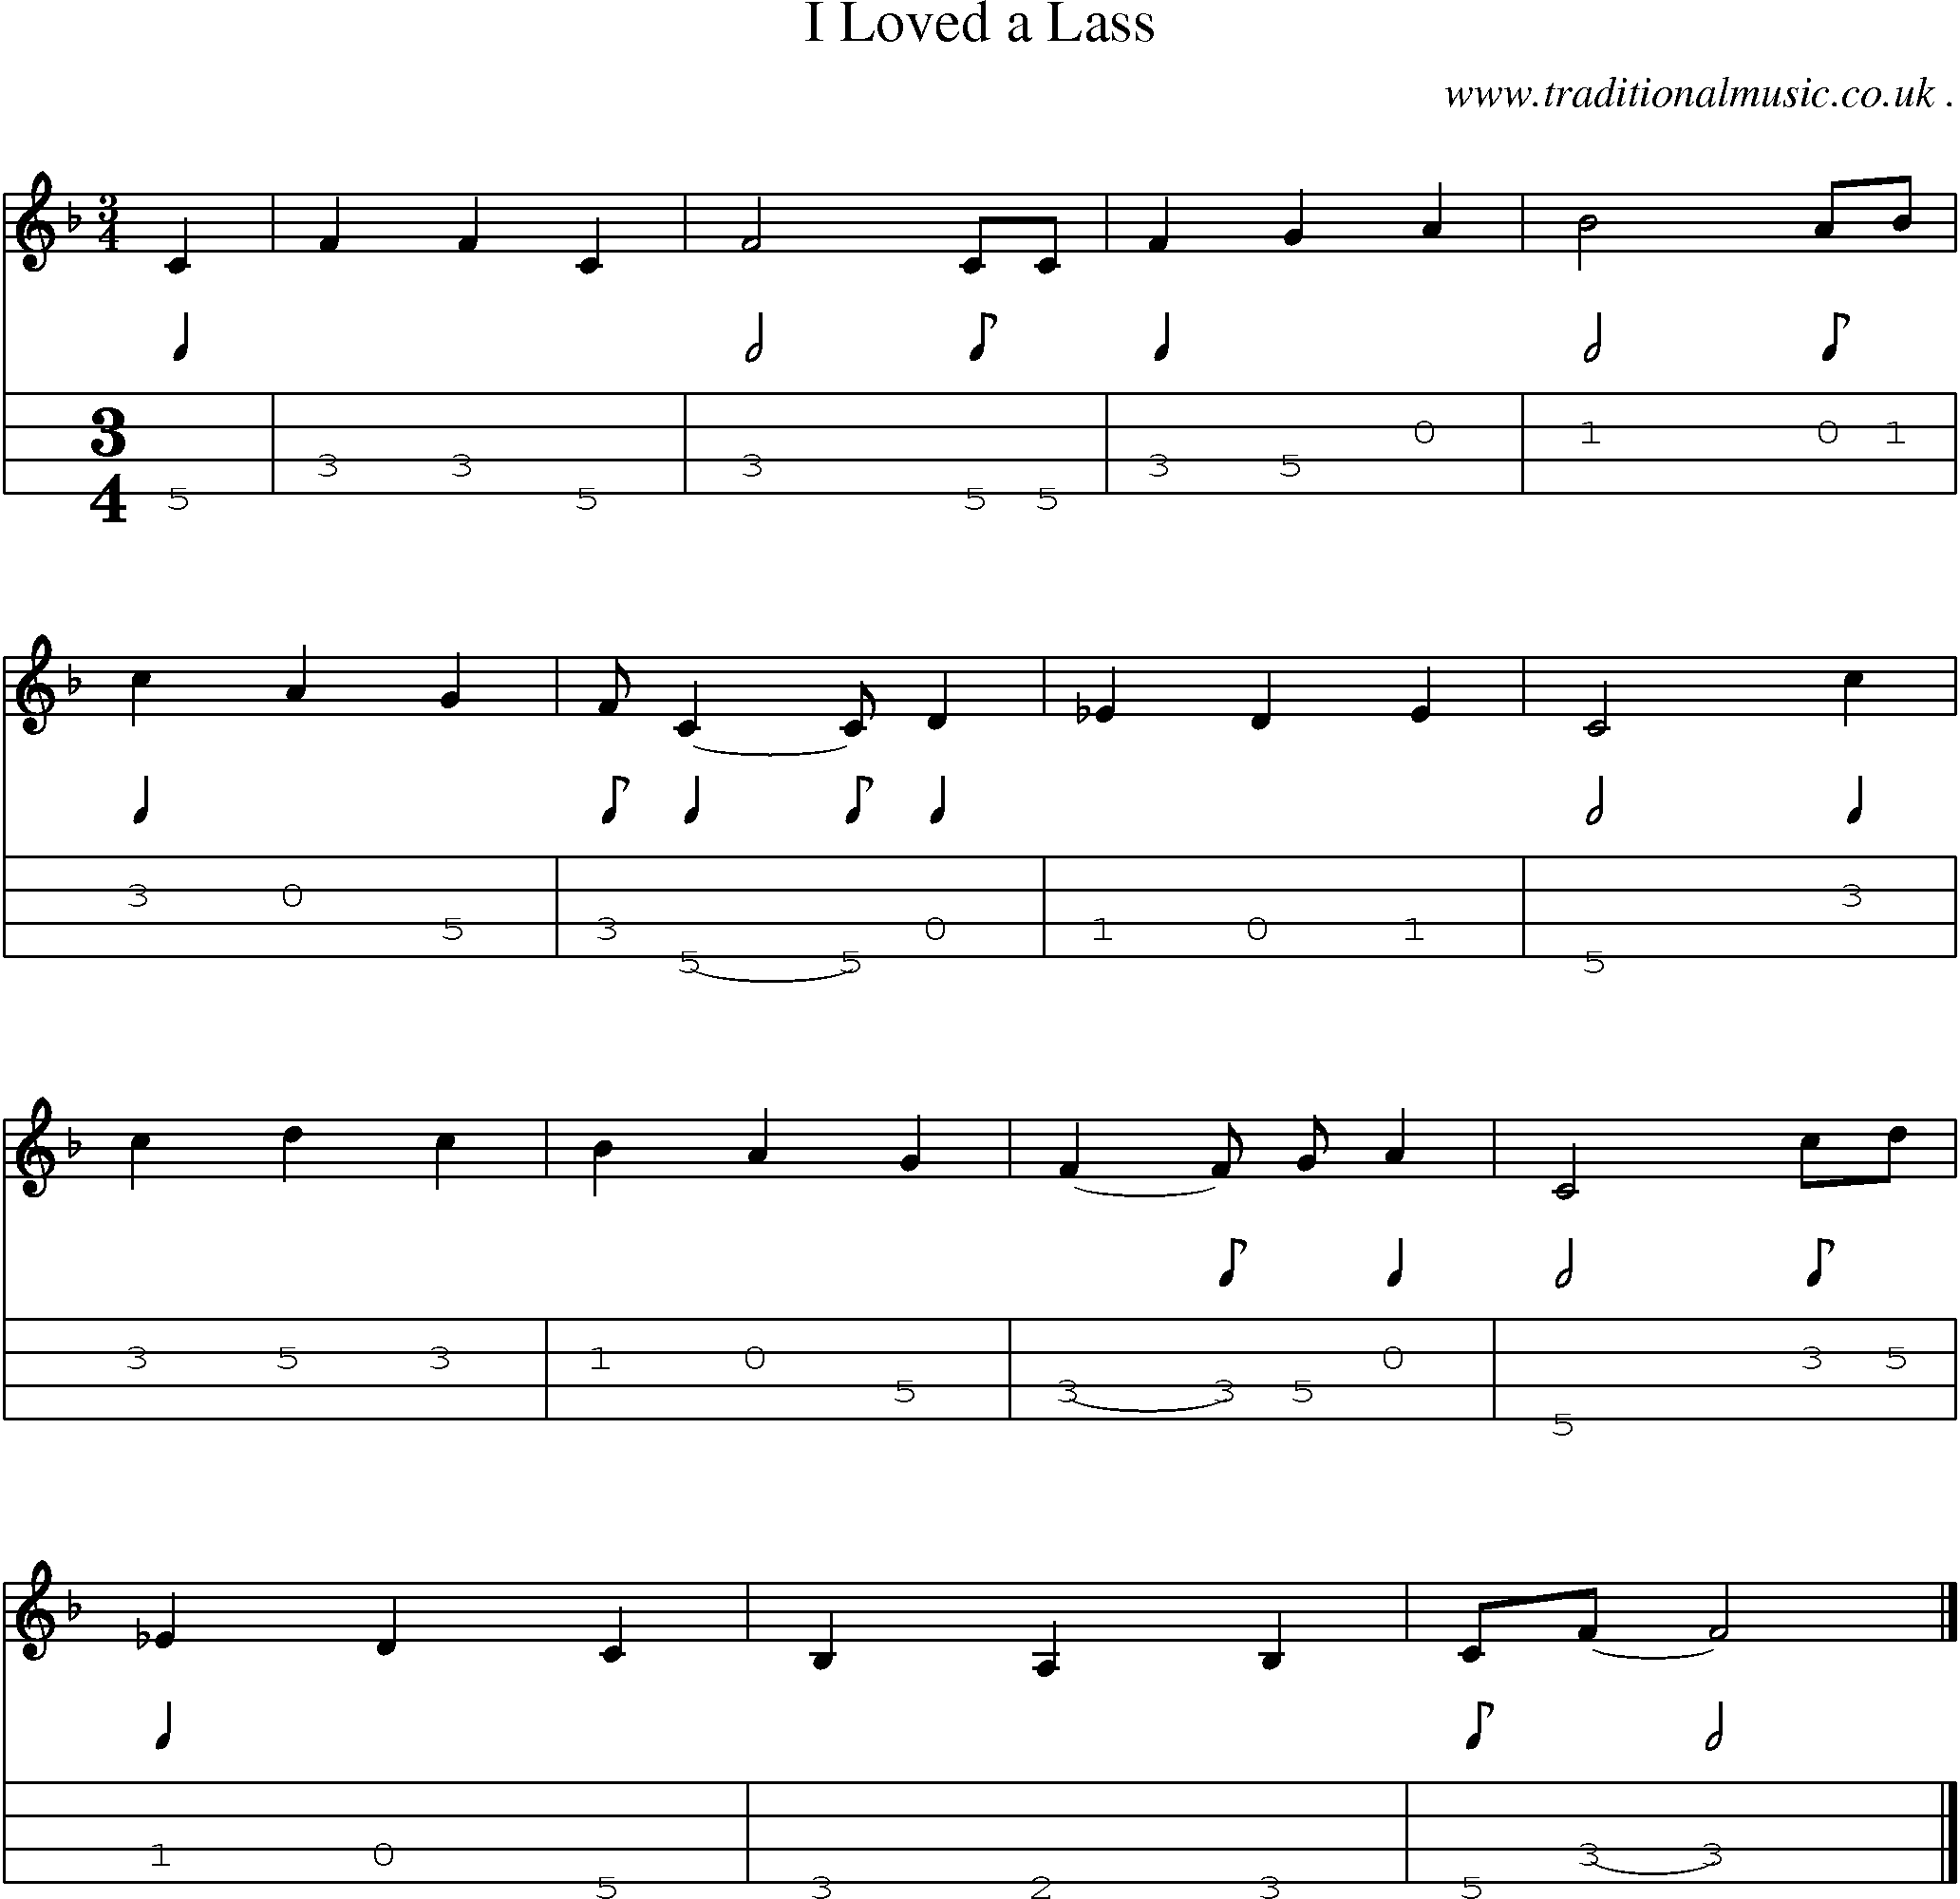 Sheet-music  score, Chords and Mandolin Tabs for I Loved A Lass